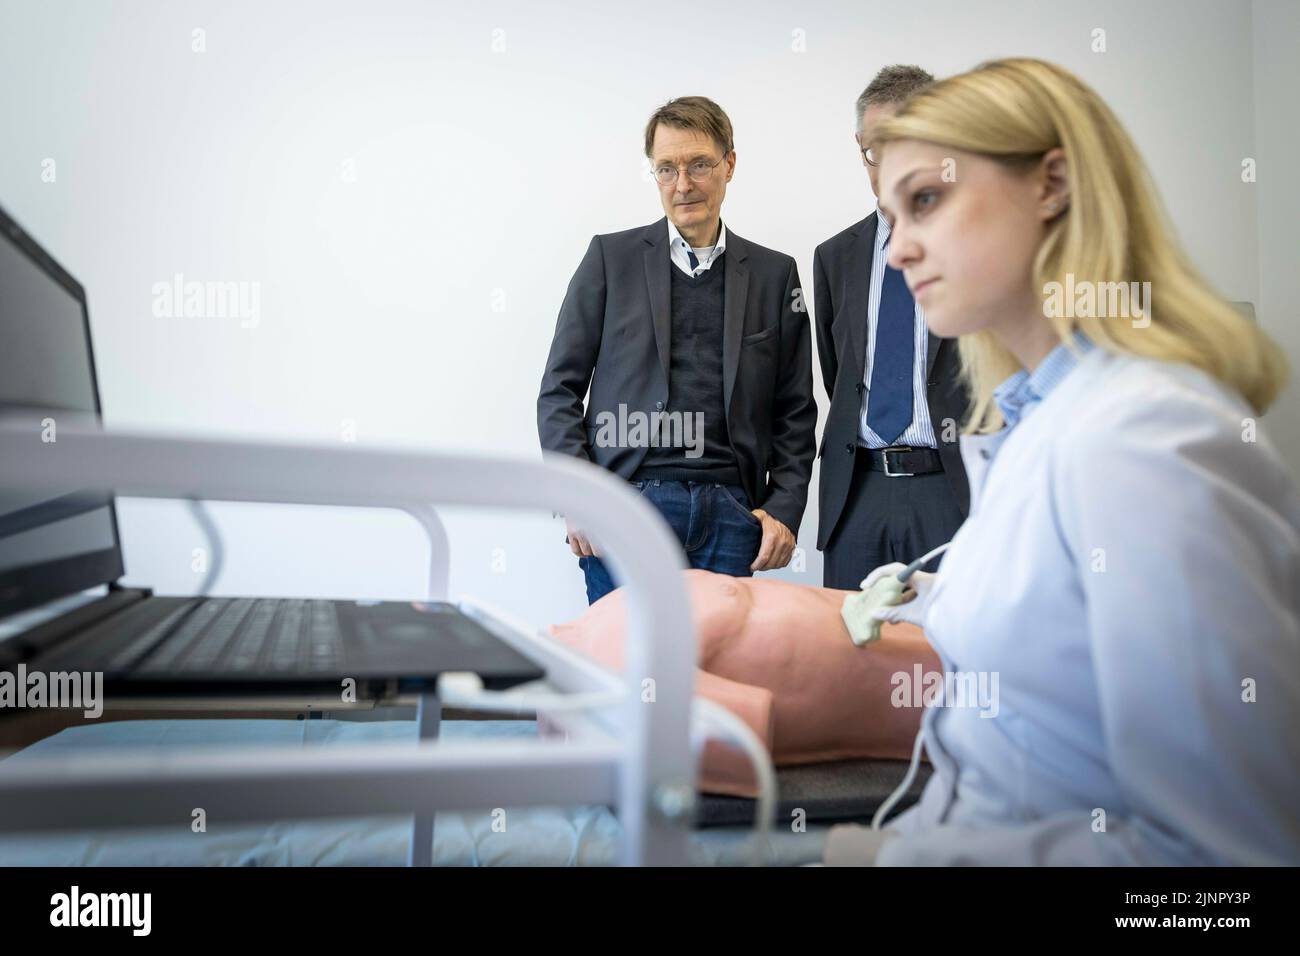 Karl Lauterbach (SPD), Federal Minister of Health, visits the training simulation center of the Lviv National Medical University na Danylo in the Ukrainian city of Lviv (Lemberg). Here doctors are trained on dummies and with the help of computer simulations, Stock Photo